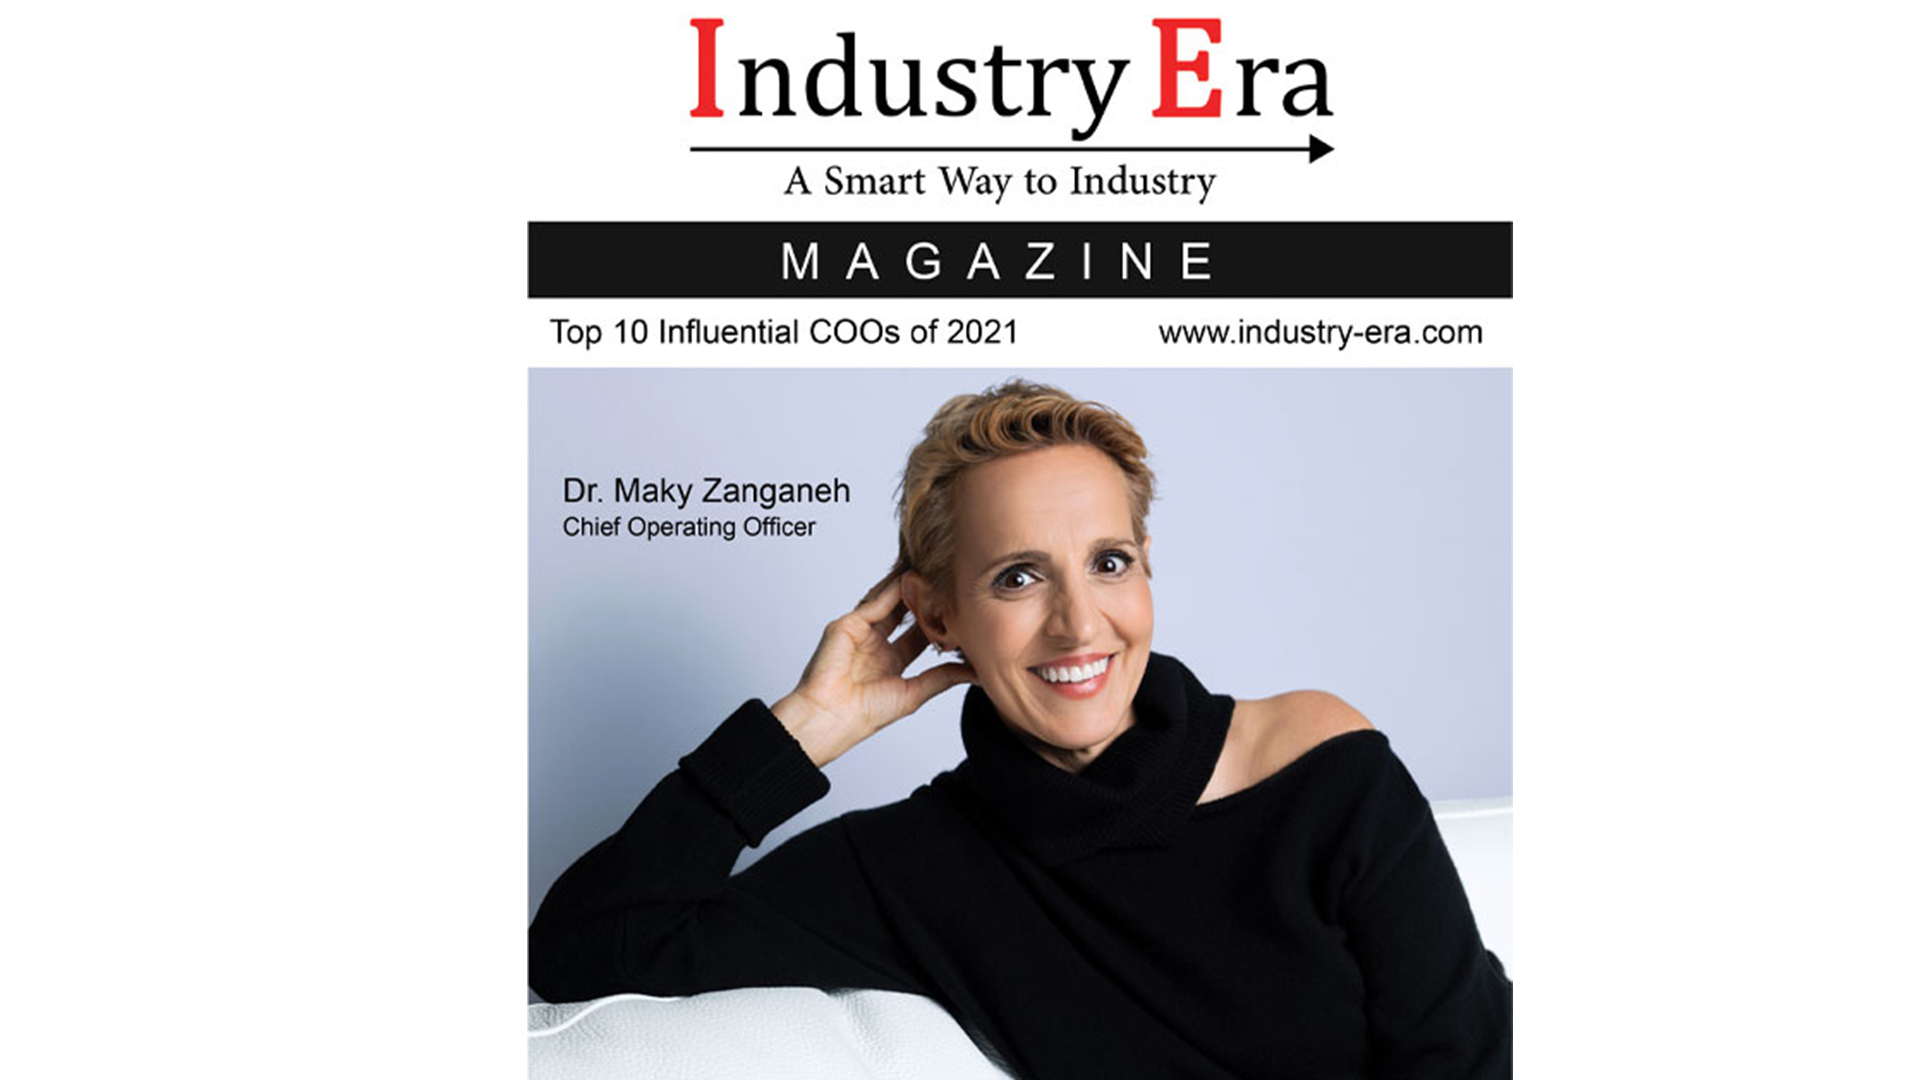 Dr. Maky Zanganeh is Honored as One of the Top 10 Influential Chief Operating Officers of 2021